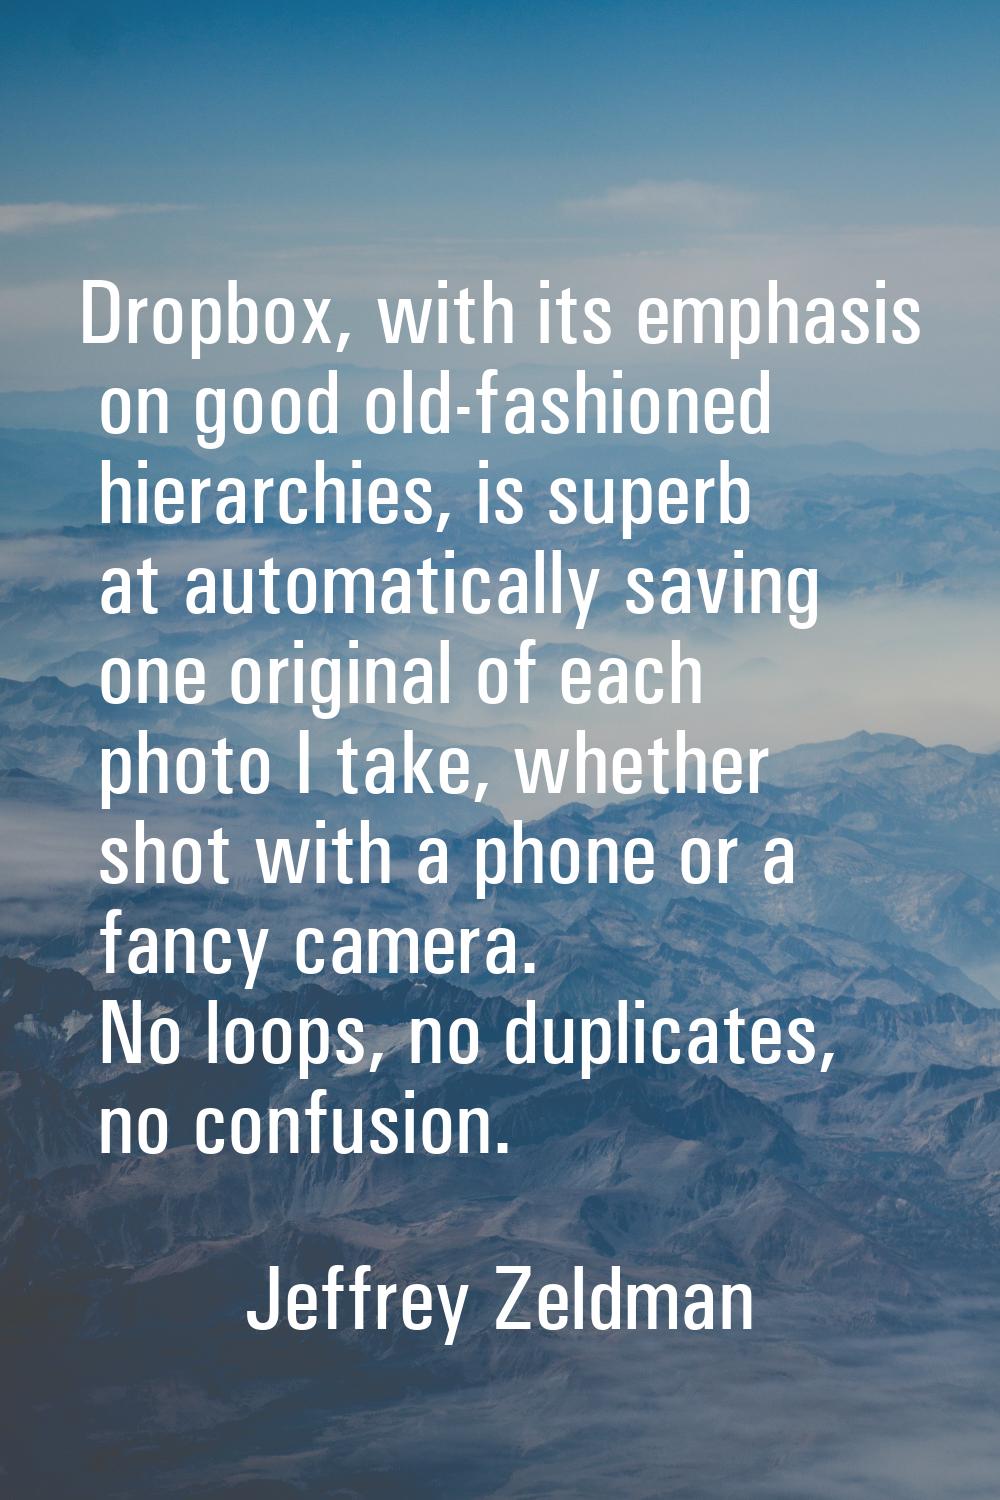 Dropbox, with its emphasis on good old-fashioned hierarchies, is superb at automatically saving one